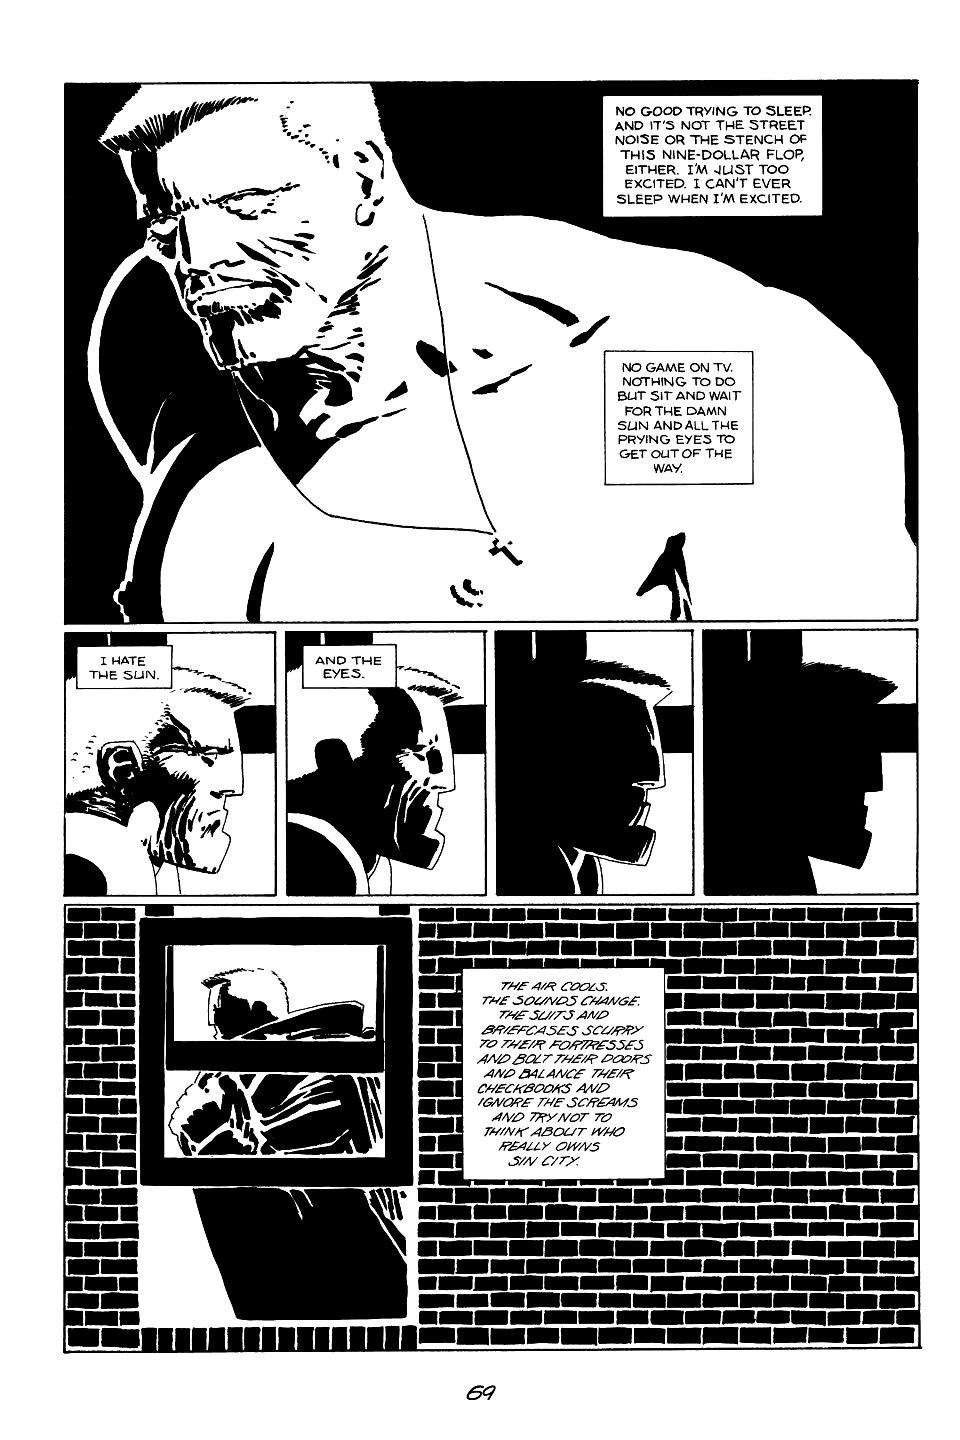 page 69 of sin city 1 the hard goodbye